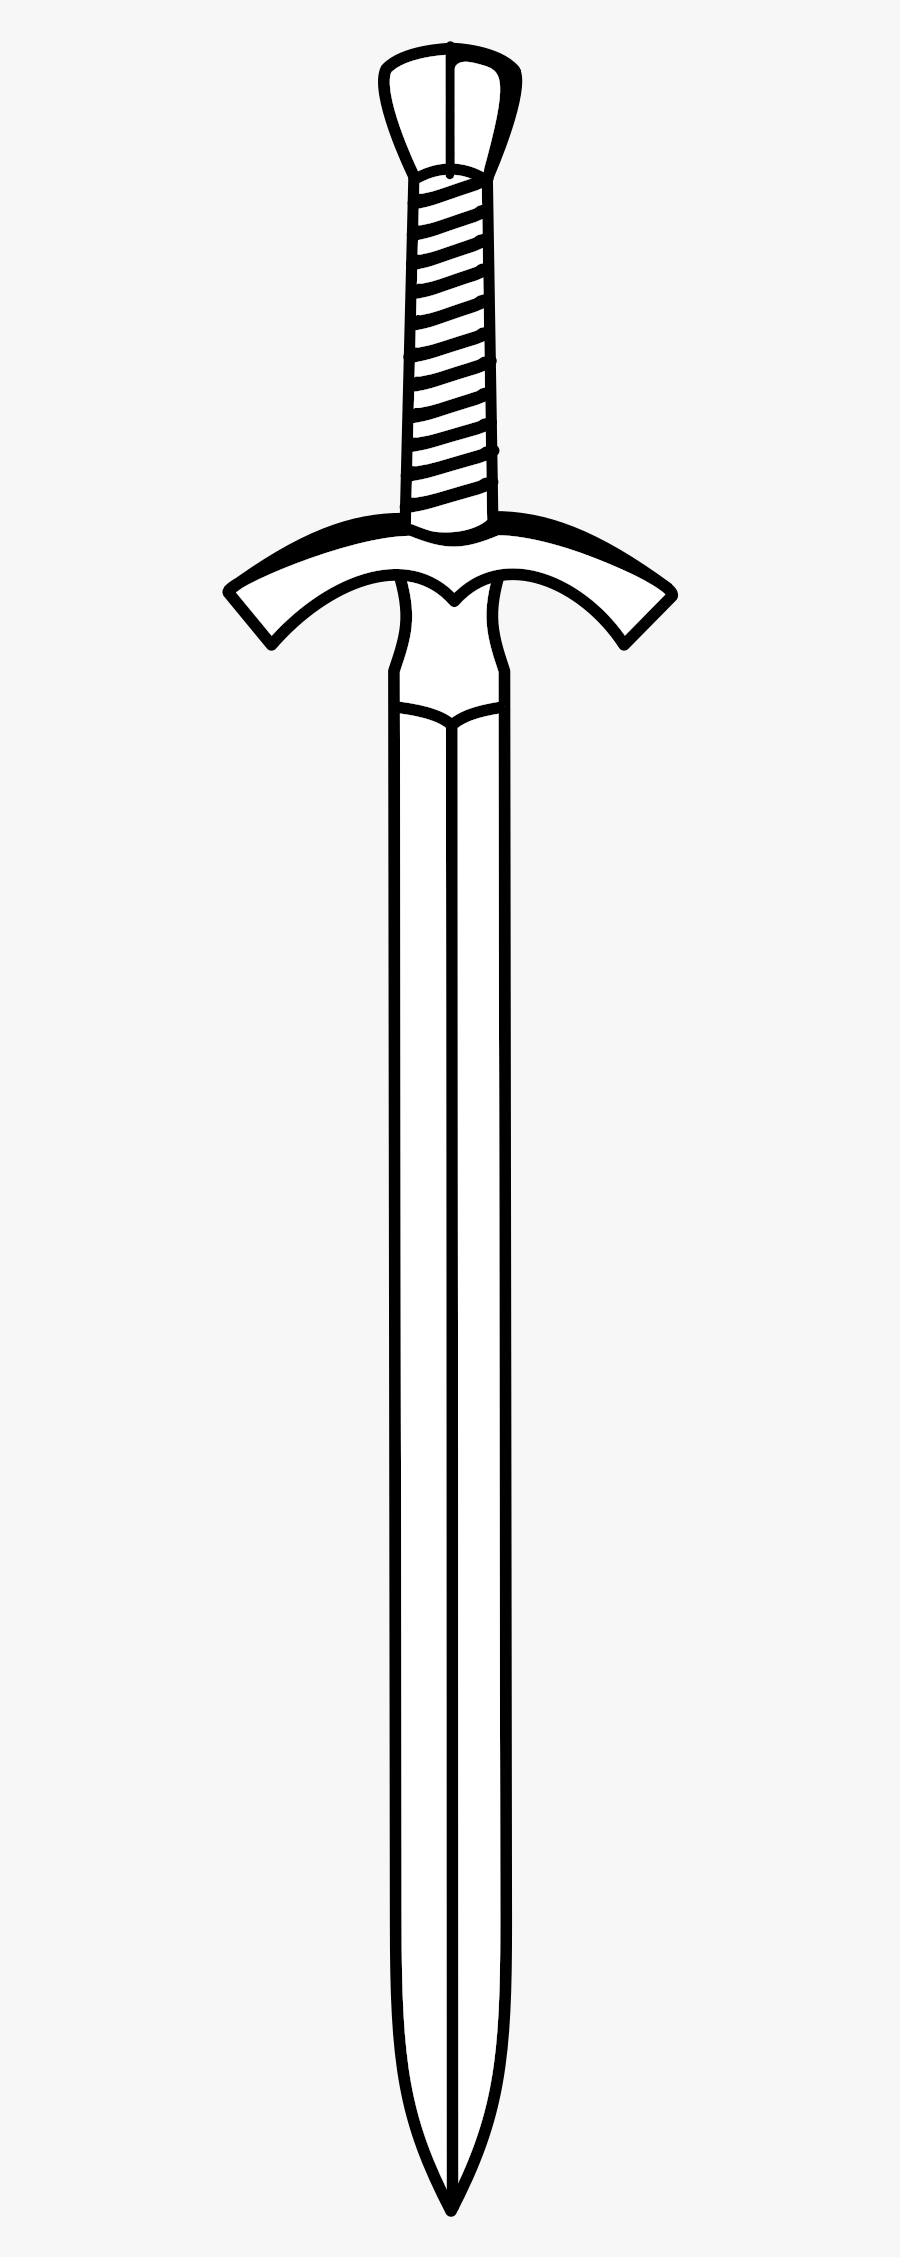 Black And White Transparent - Black And White Sword, Transparent Clipart